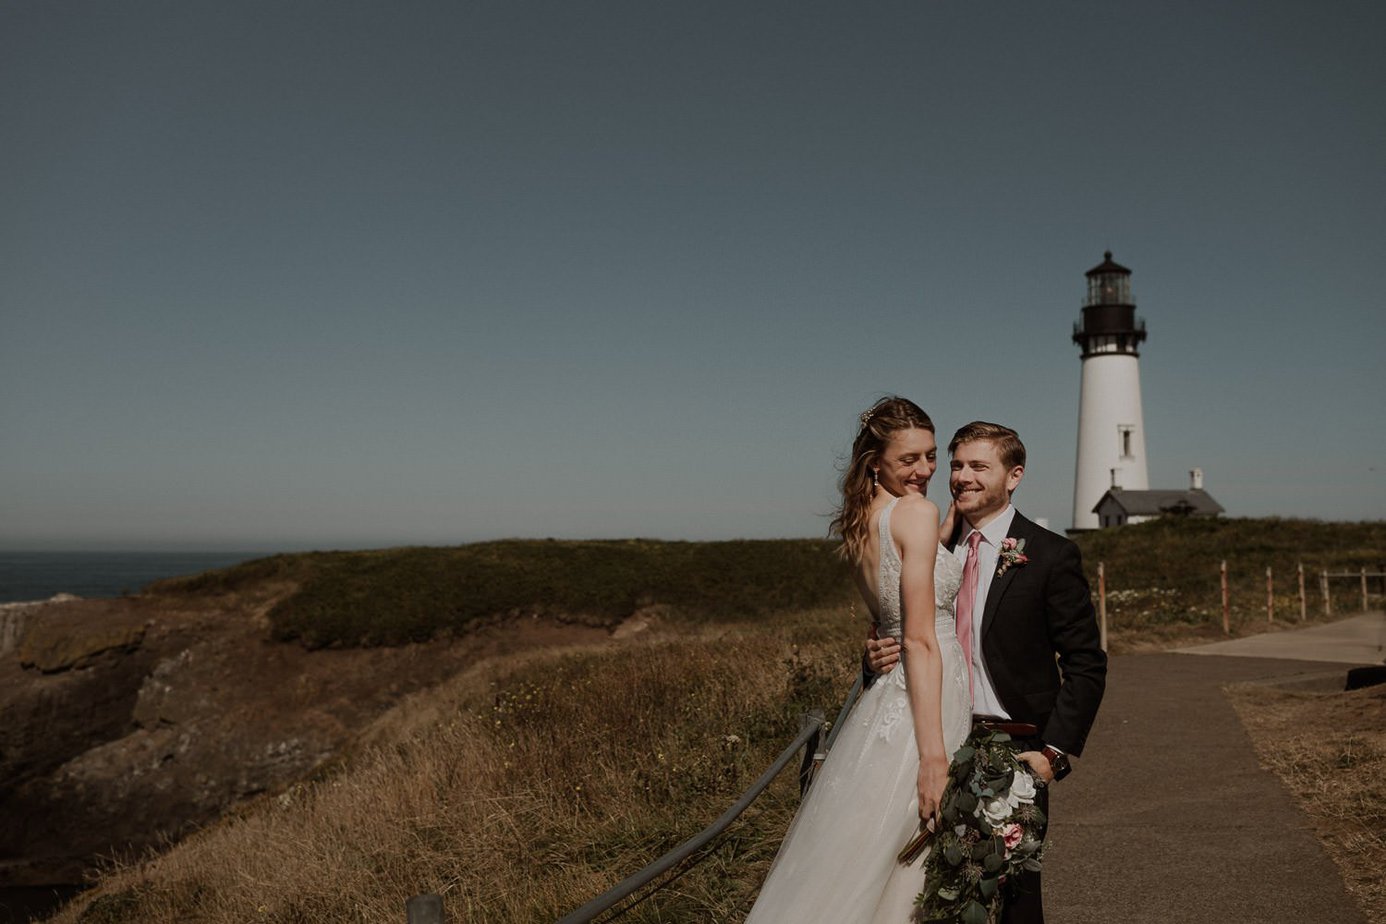 Bride and groom snuggle close at their cobble beach elopement. Yaquina Head lighthouse is in the background. Bride laughs at the groom